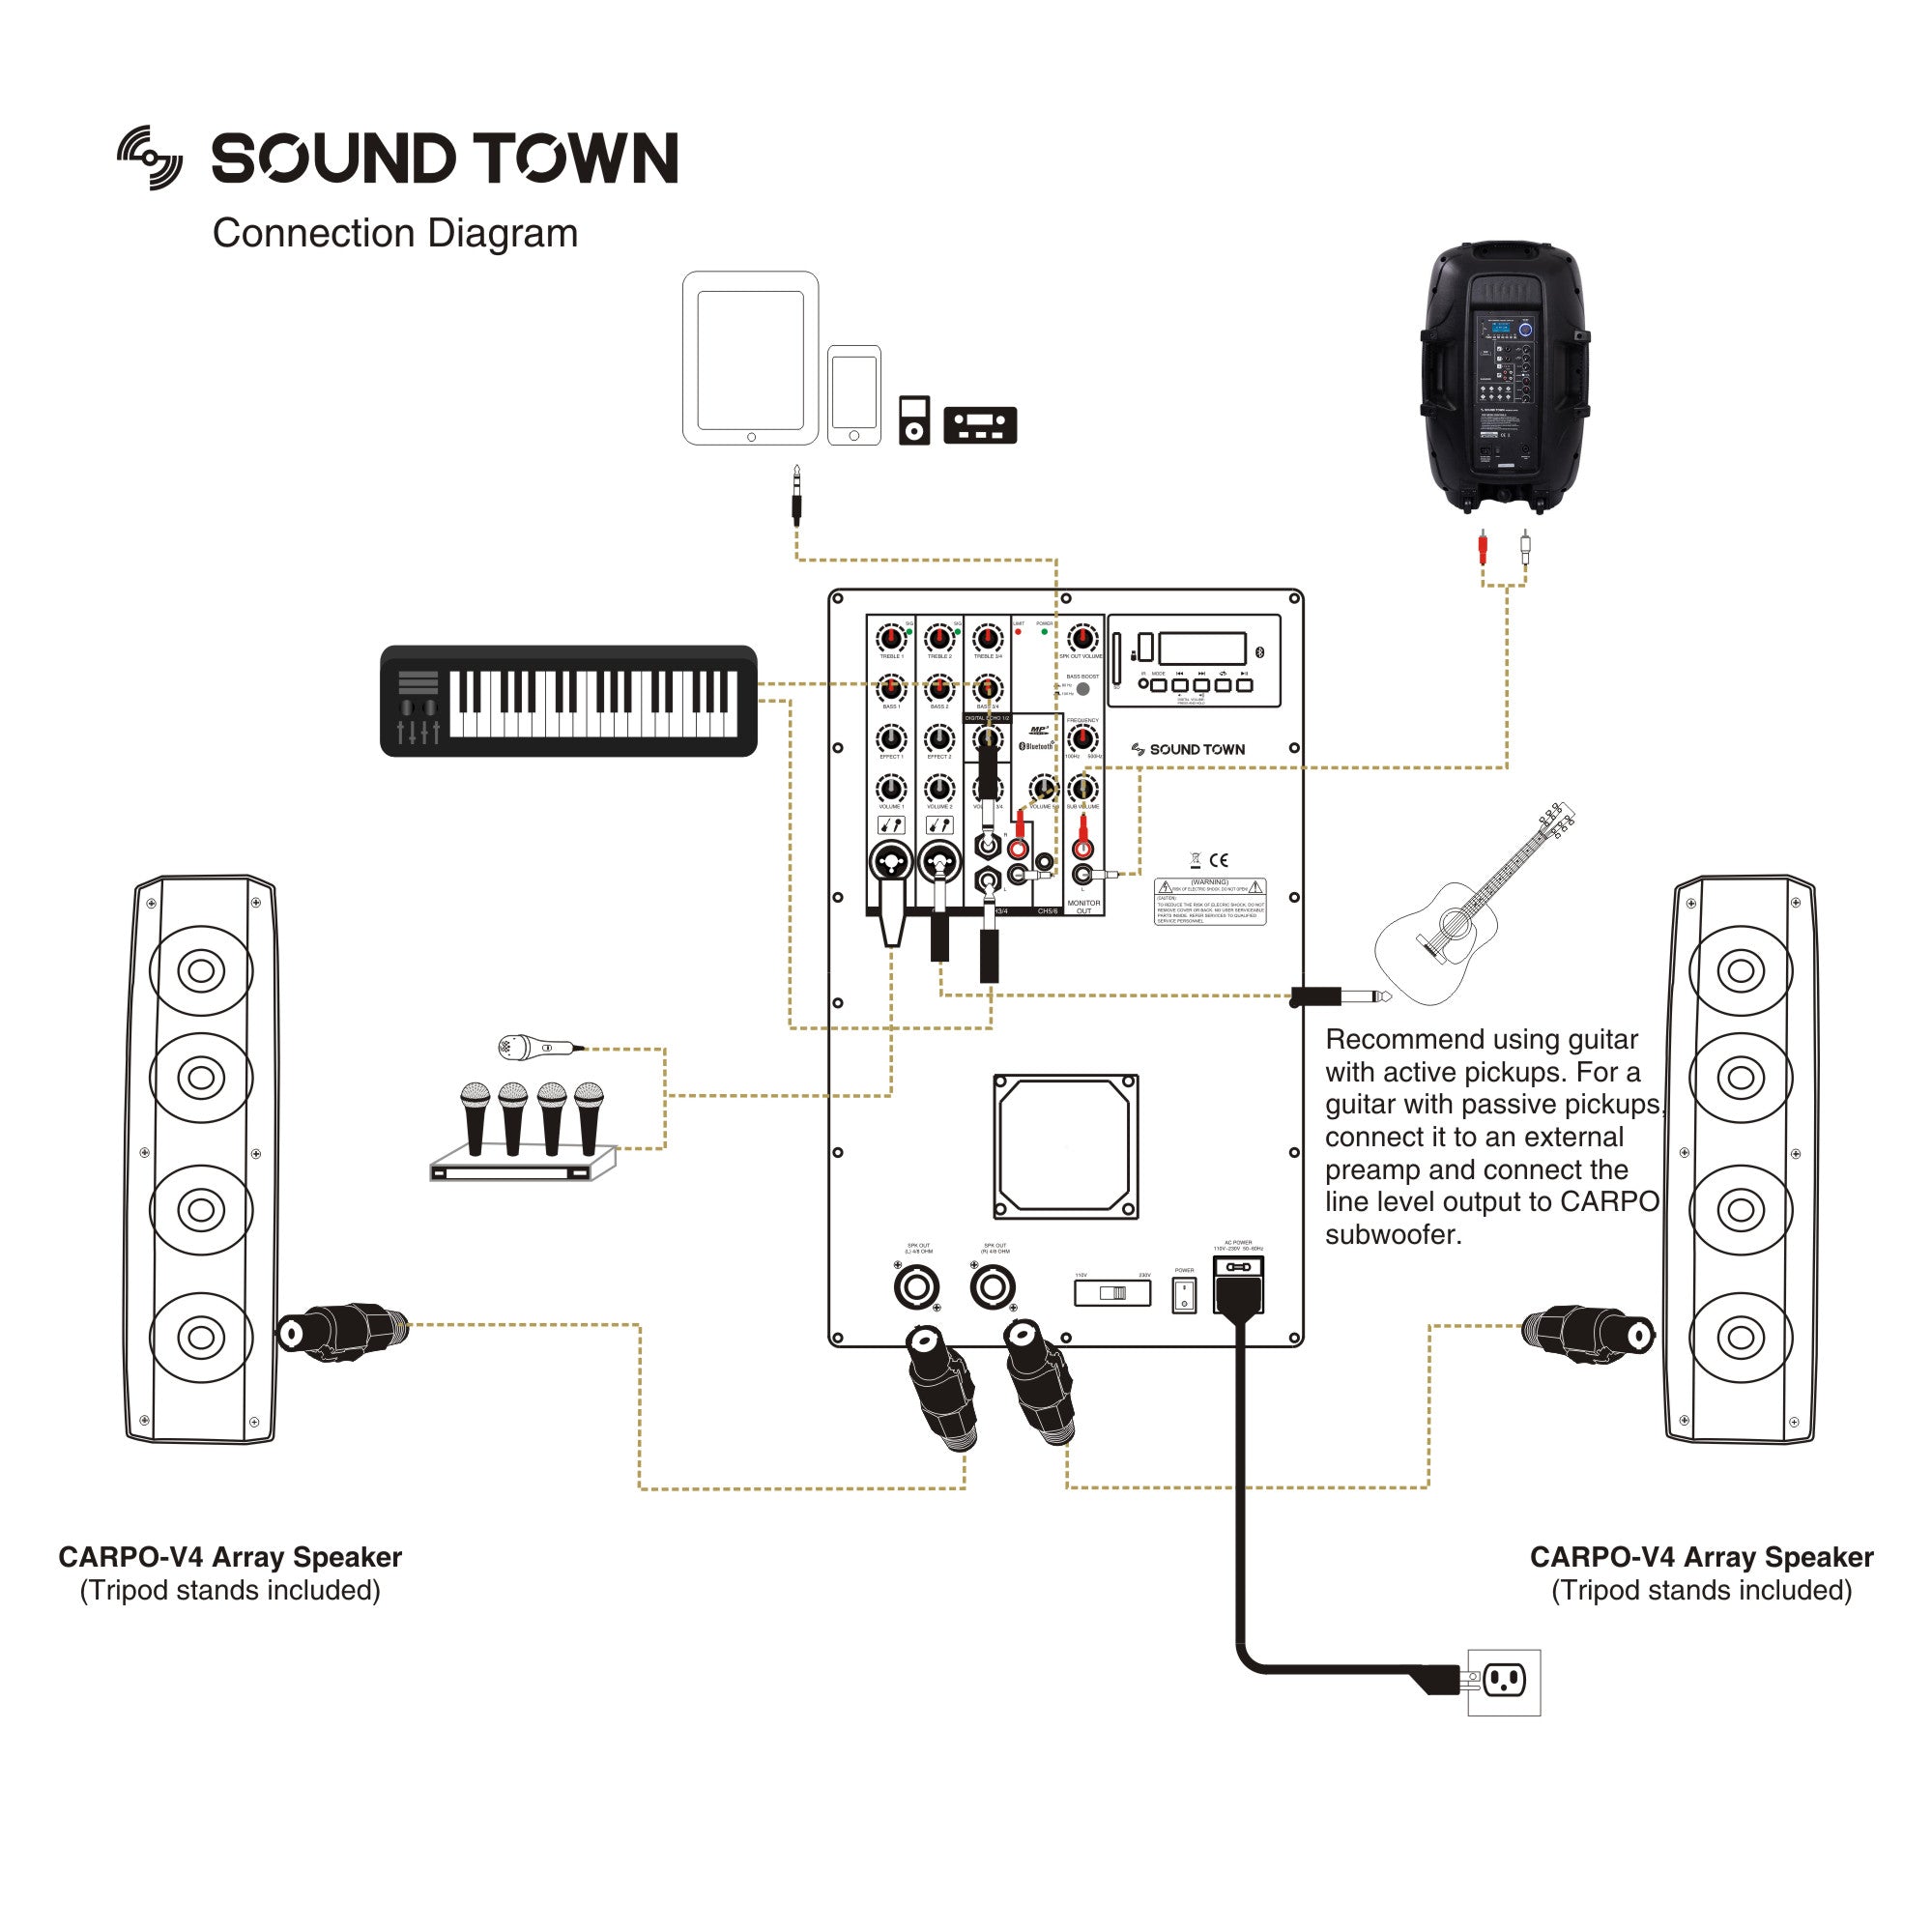 How to Connect Sound Town's CARPO-V412DS - the CARPO V4 and CARPO-12DSPW connection diagram